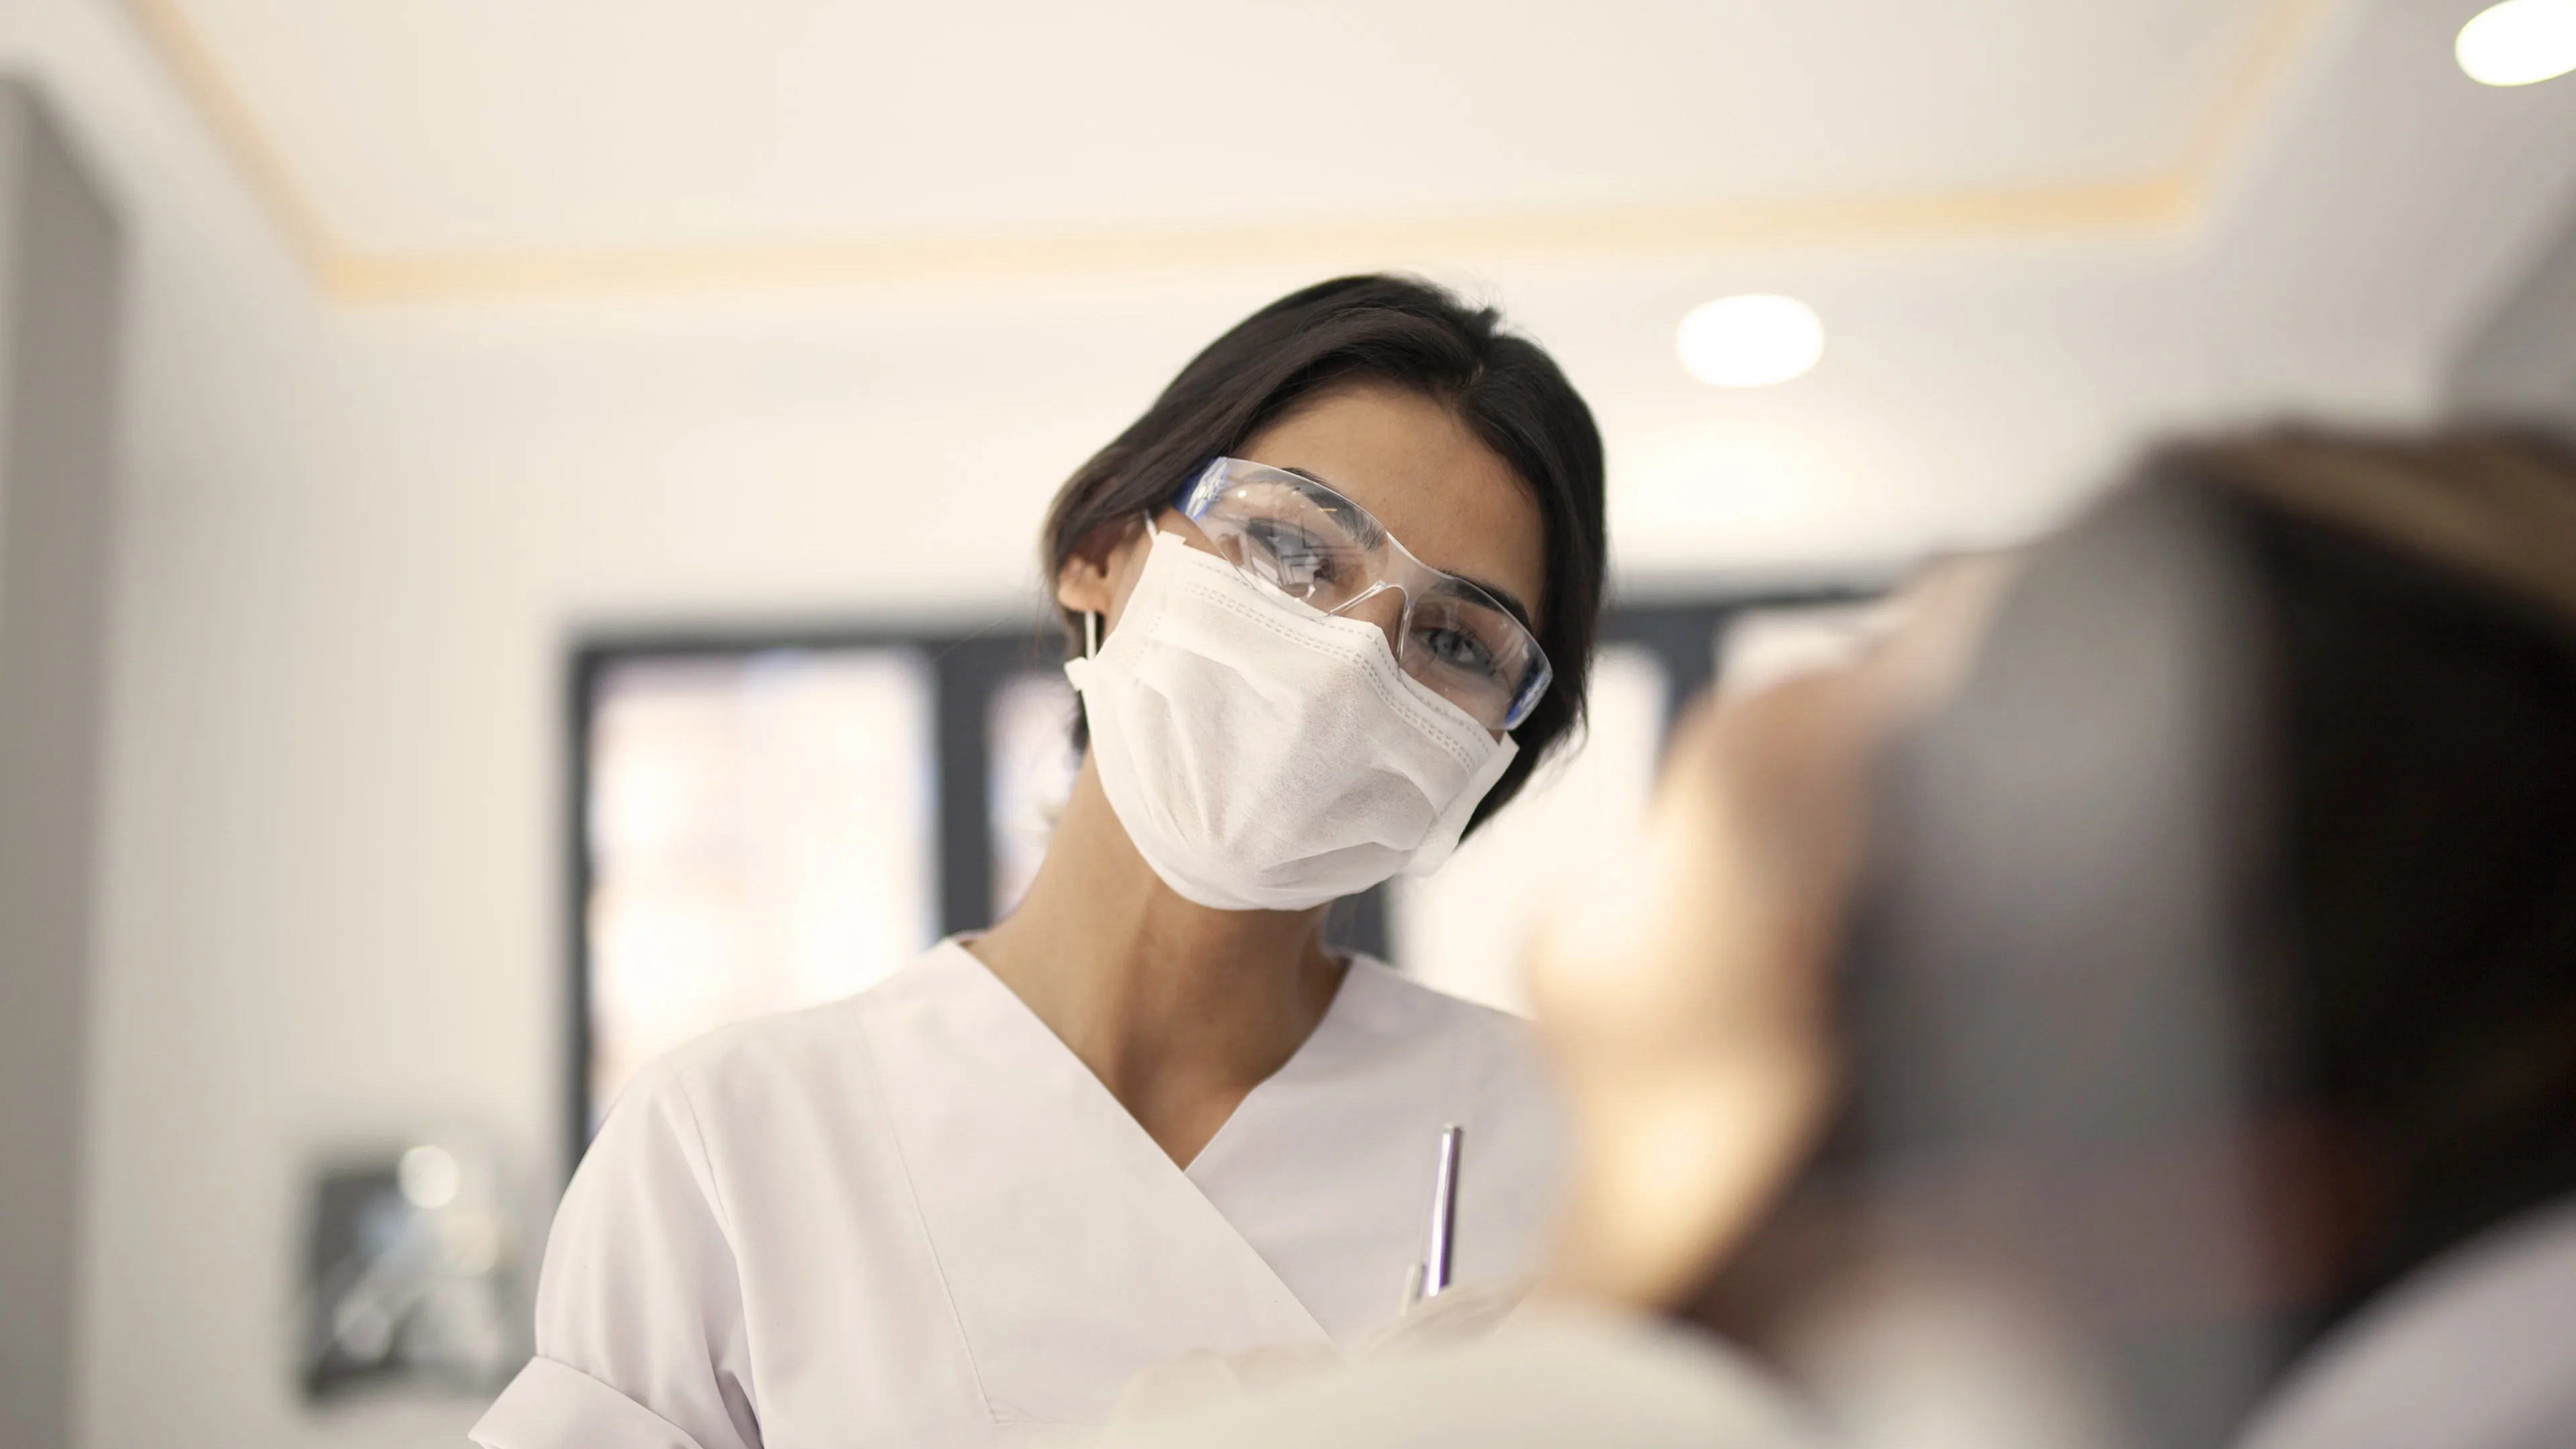 Dental assistant with mask on smiling at patient